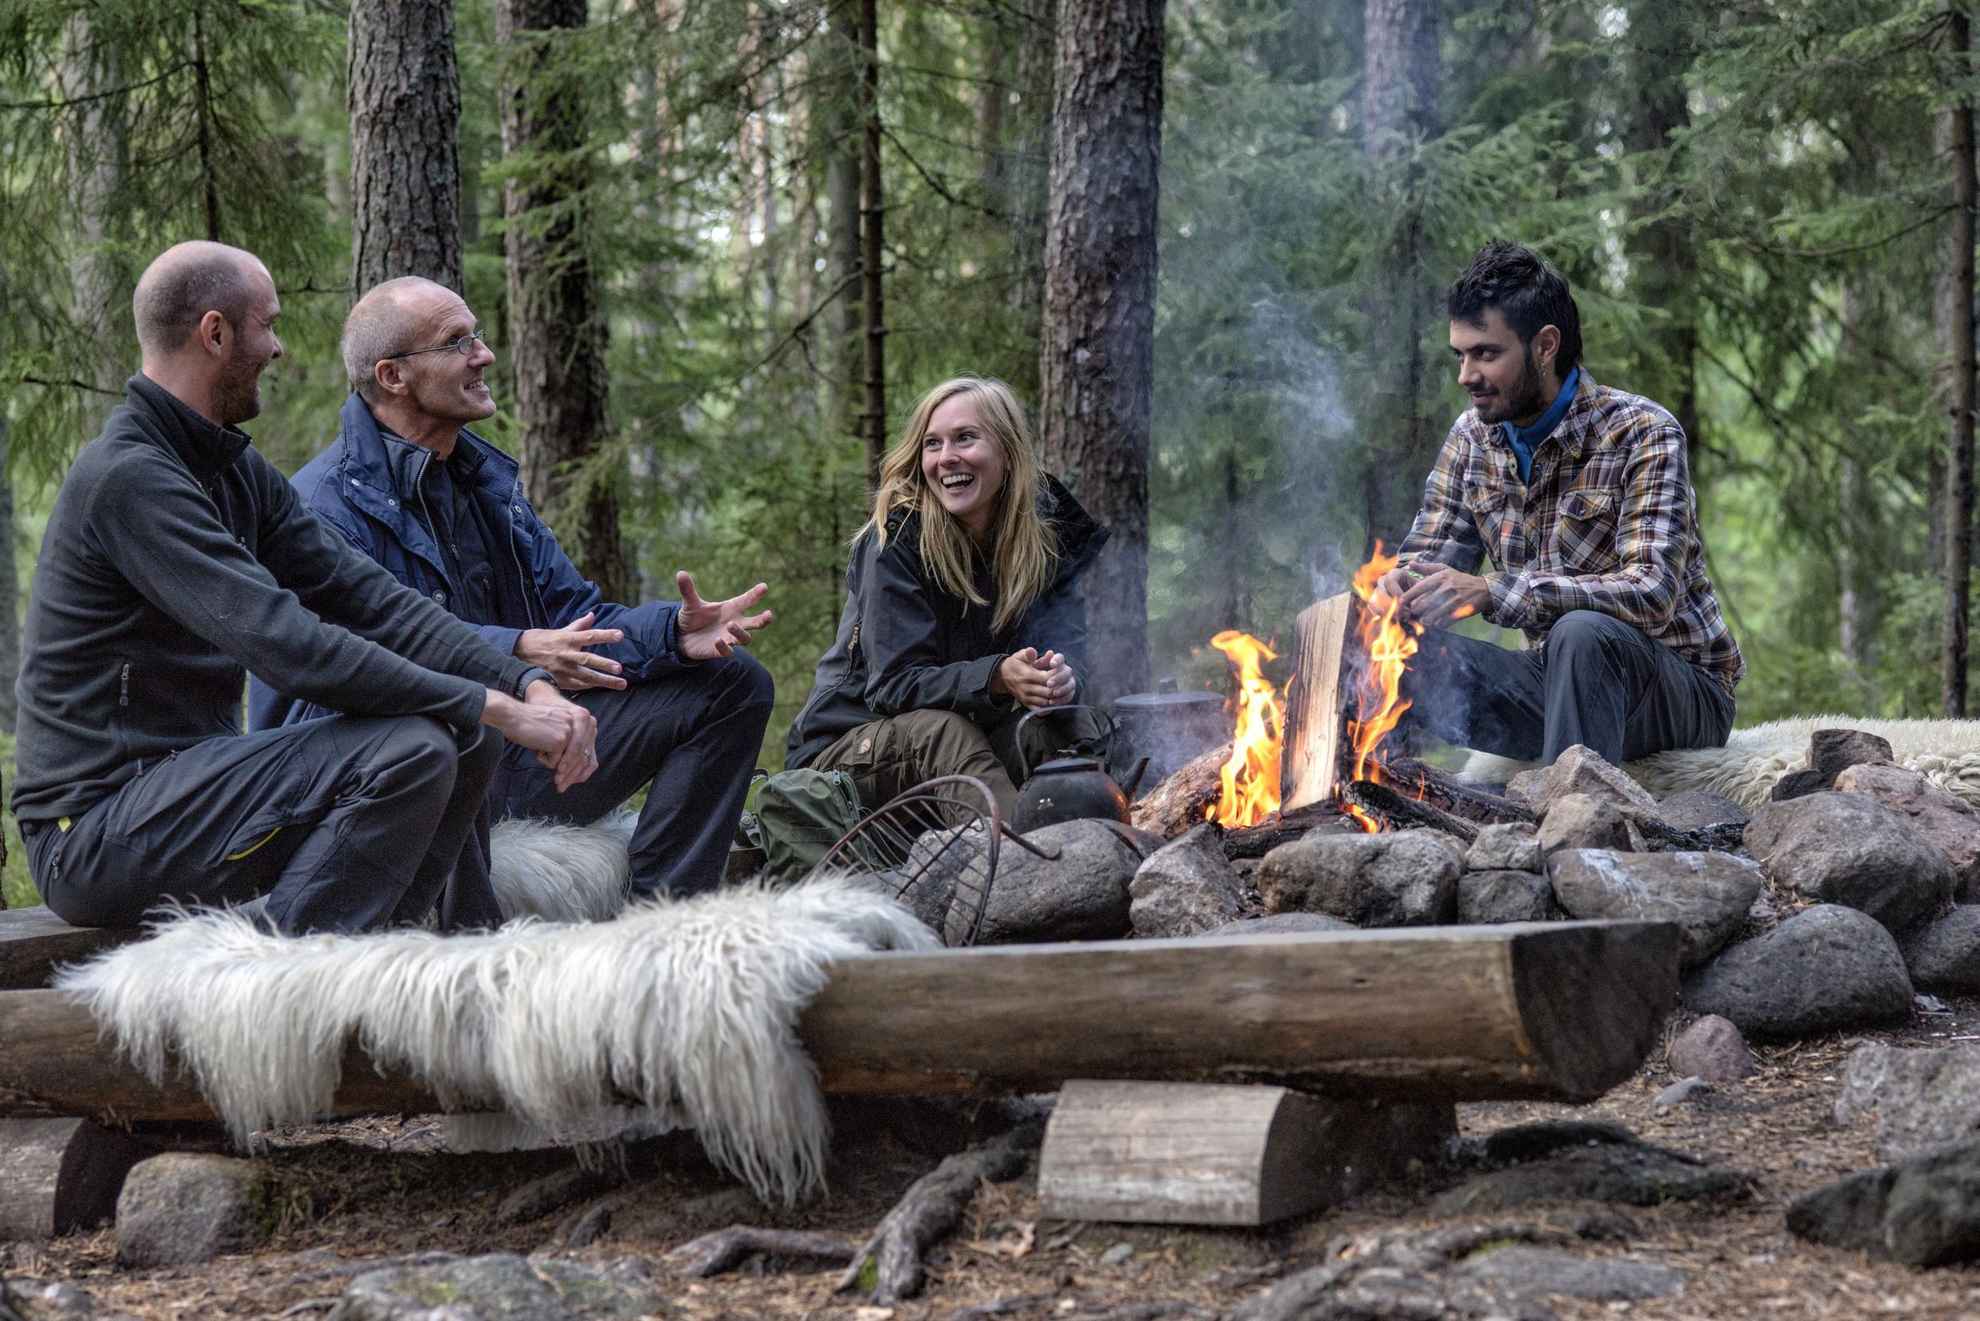 Four people sitting around a campfire in a forest laughing.